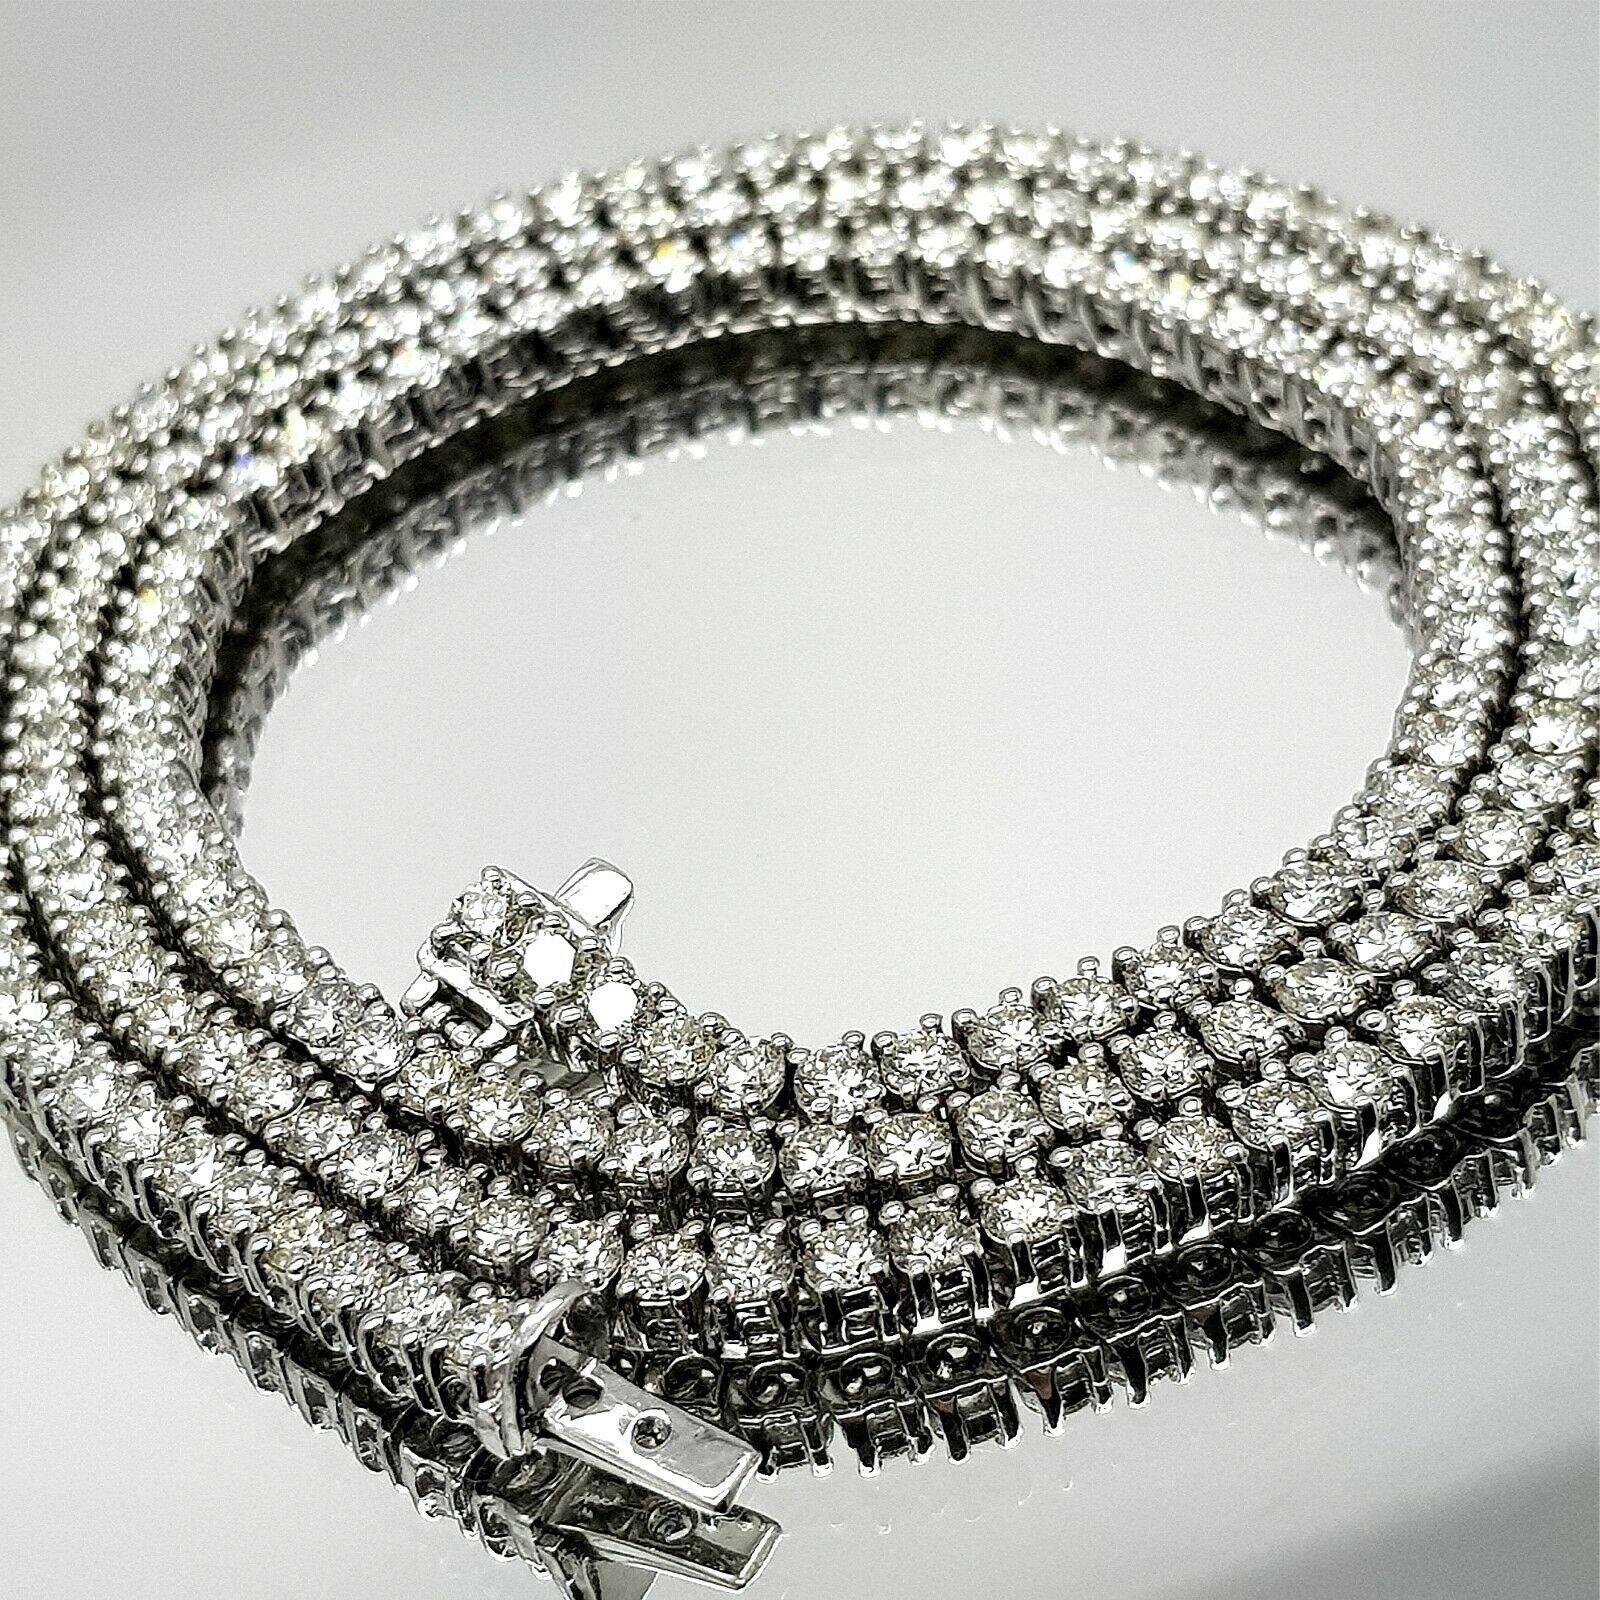  Bring elegance in your style with this stunning diamond tennis necklace, this piece features 188 pieces of round cut diamonds in approximately 16.98 carat total weight, J color and SI1 in clarity. This necklace is crafted in 14k white gold metal,